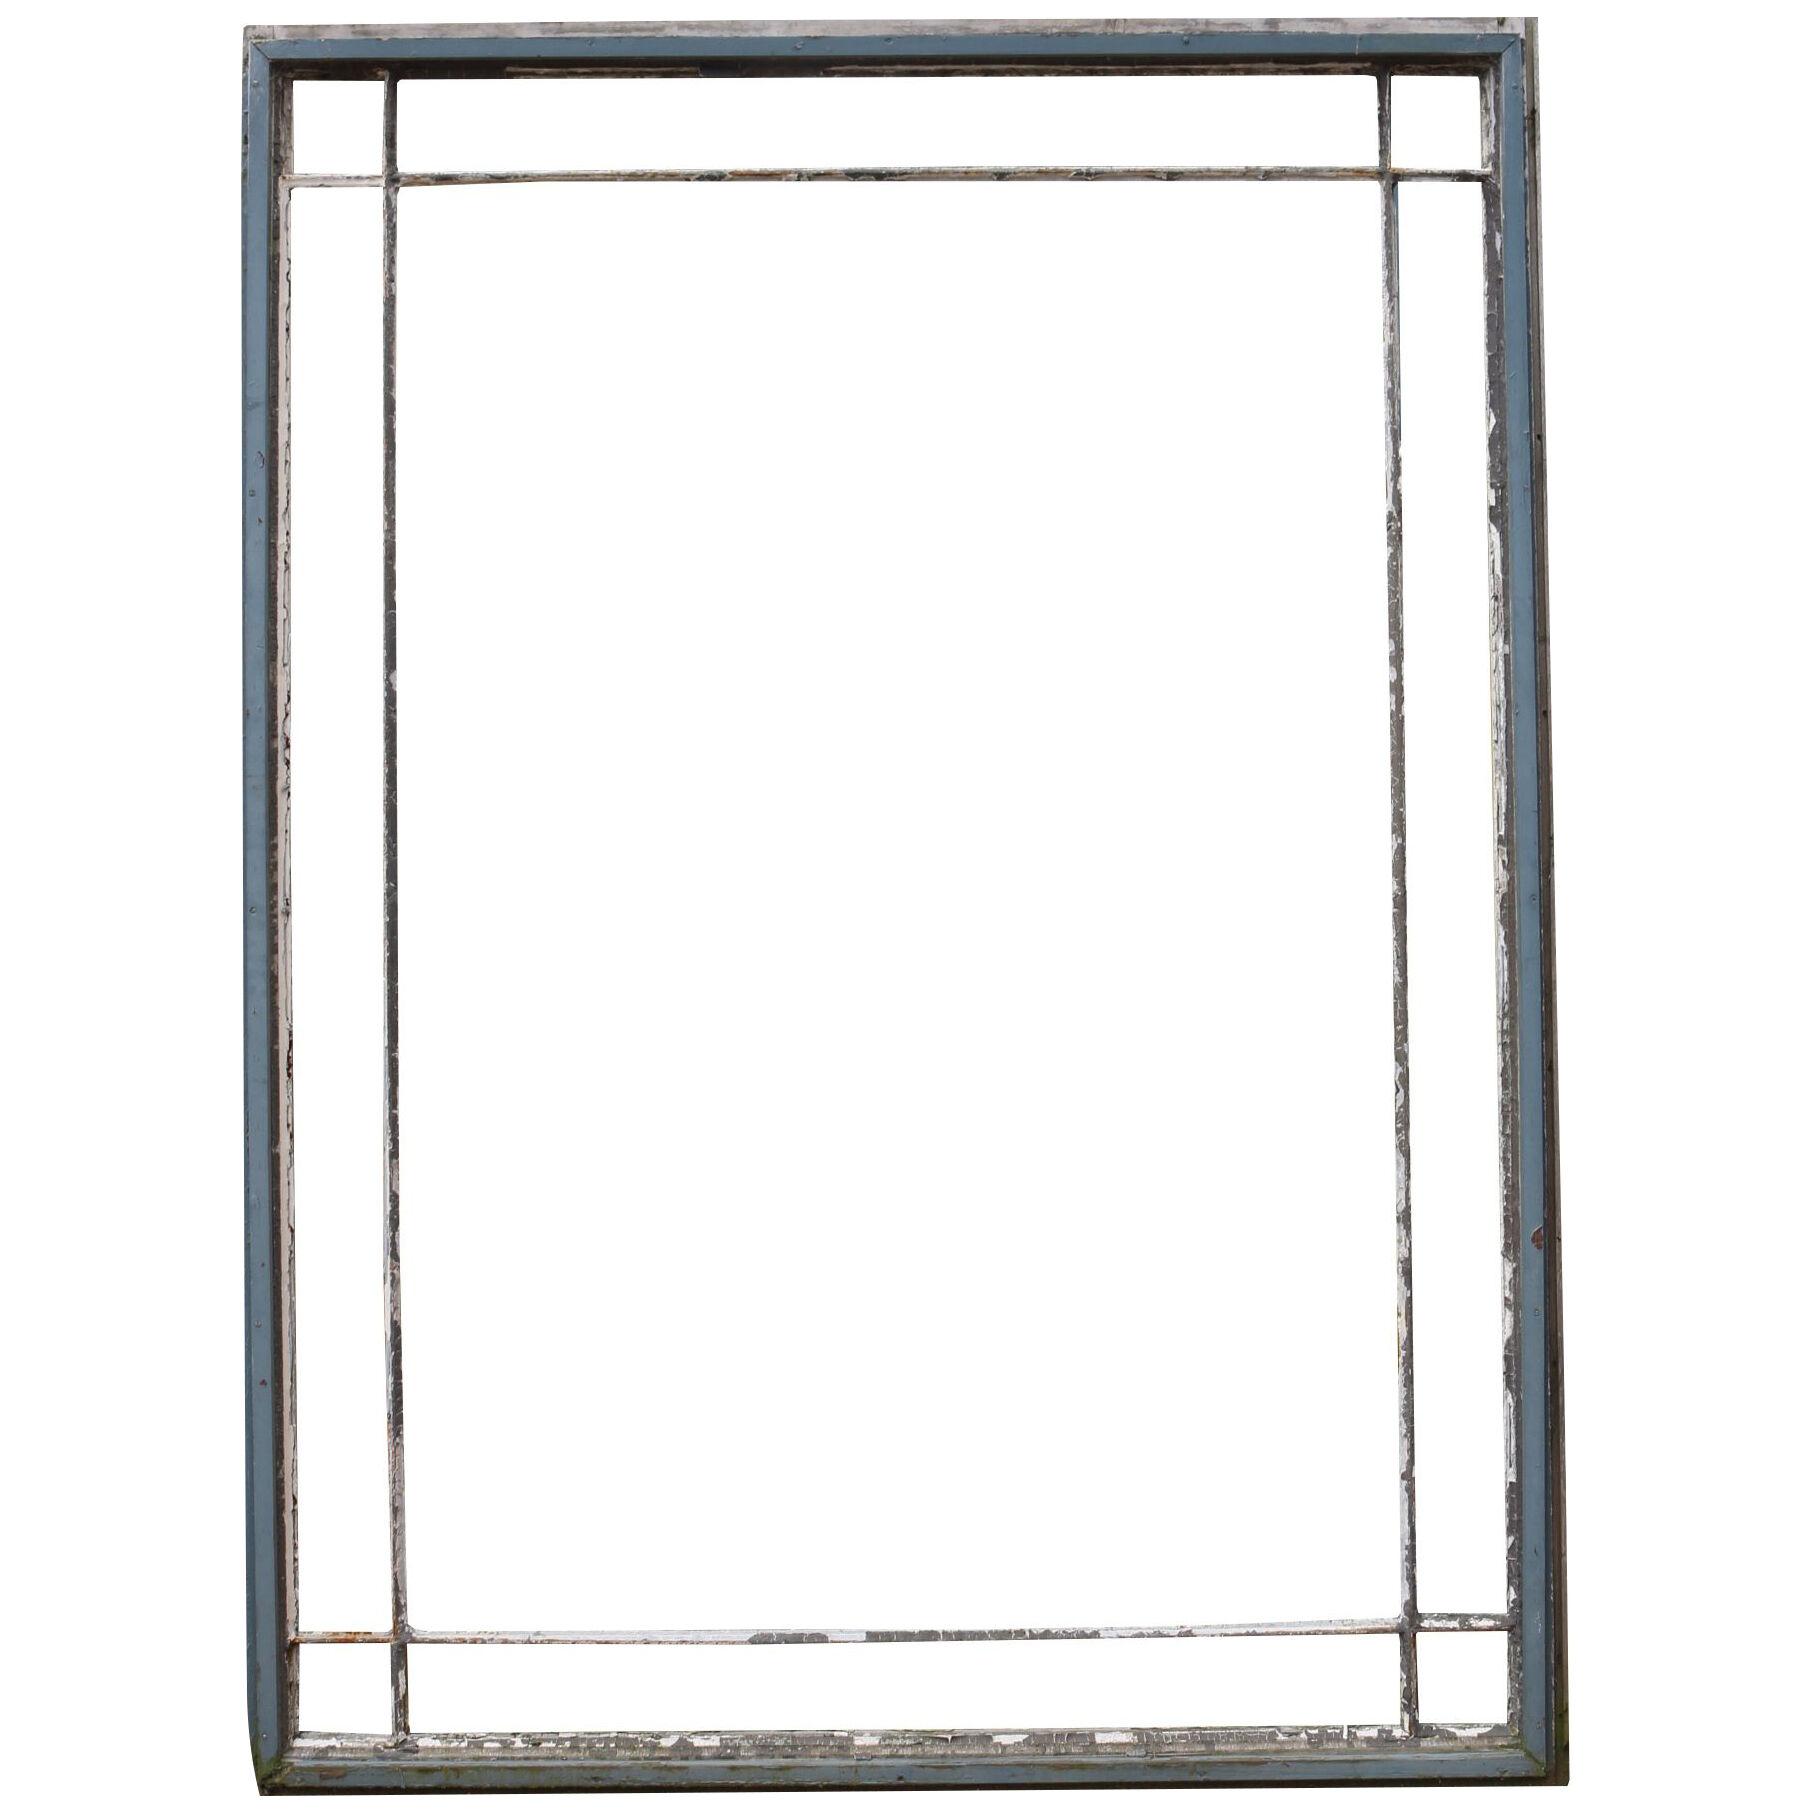 Pair of Timber and Steel Window Frames